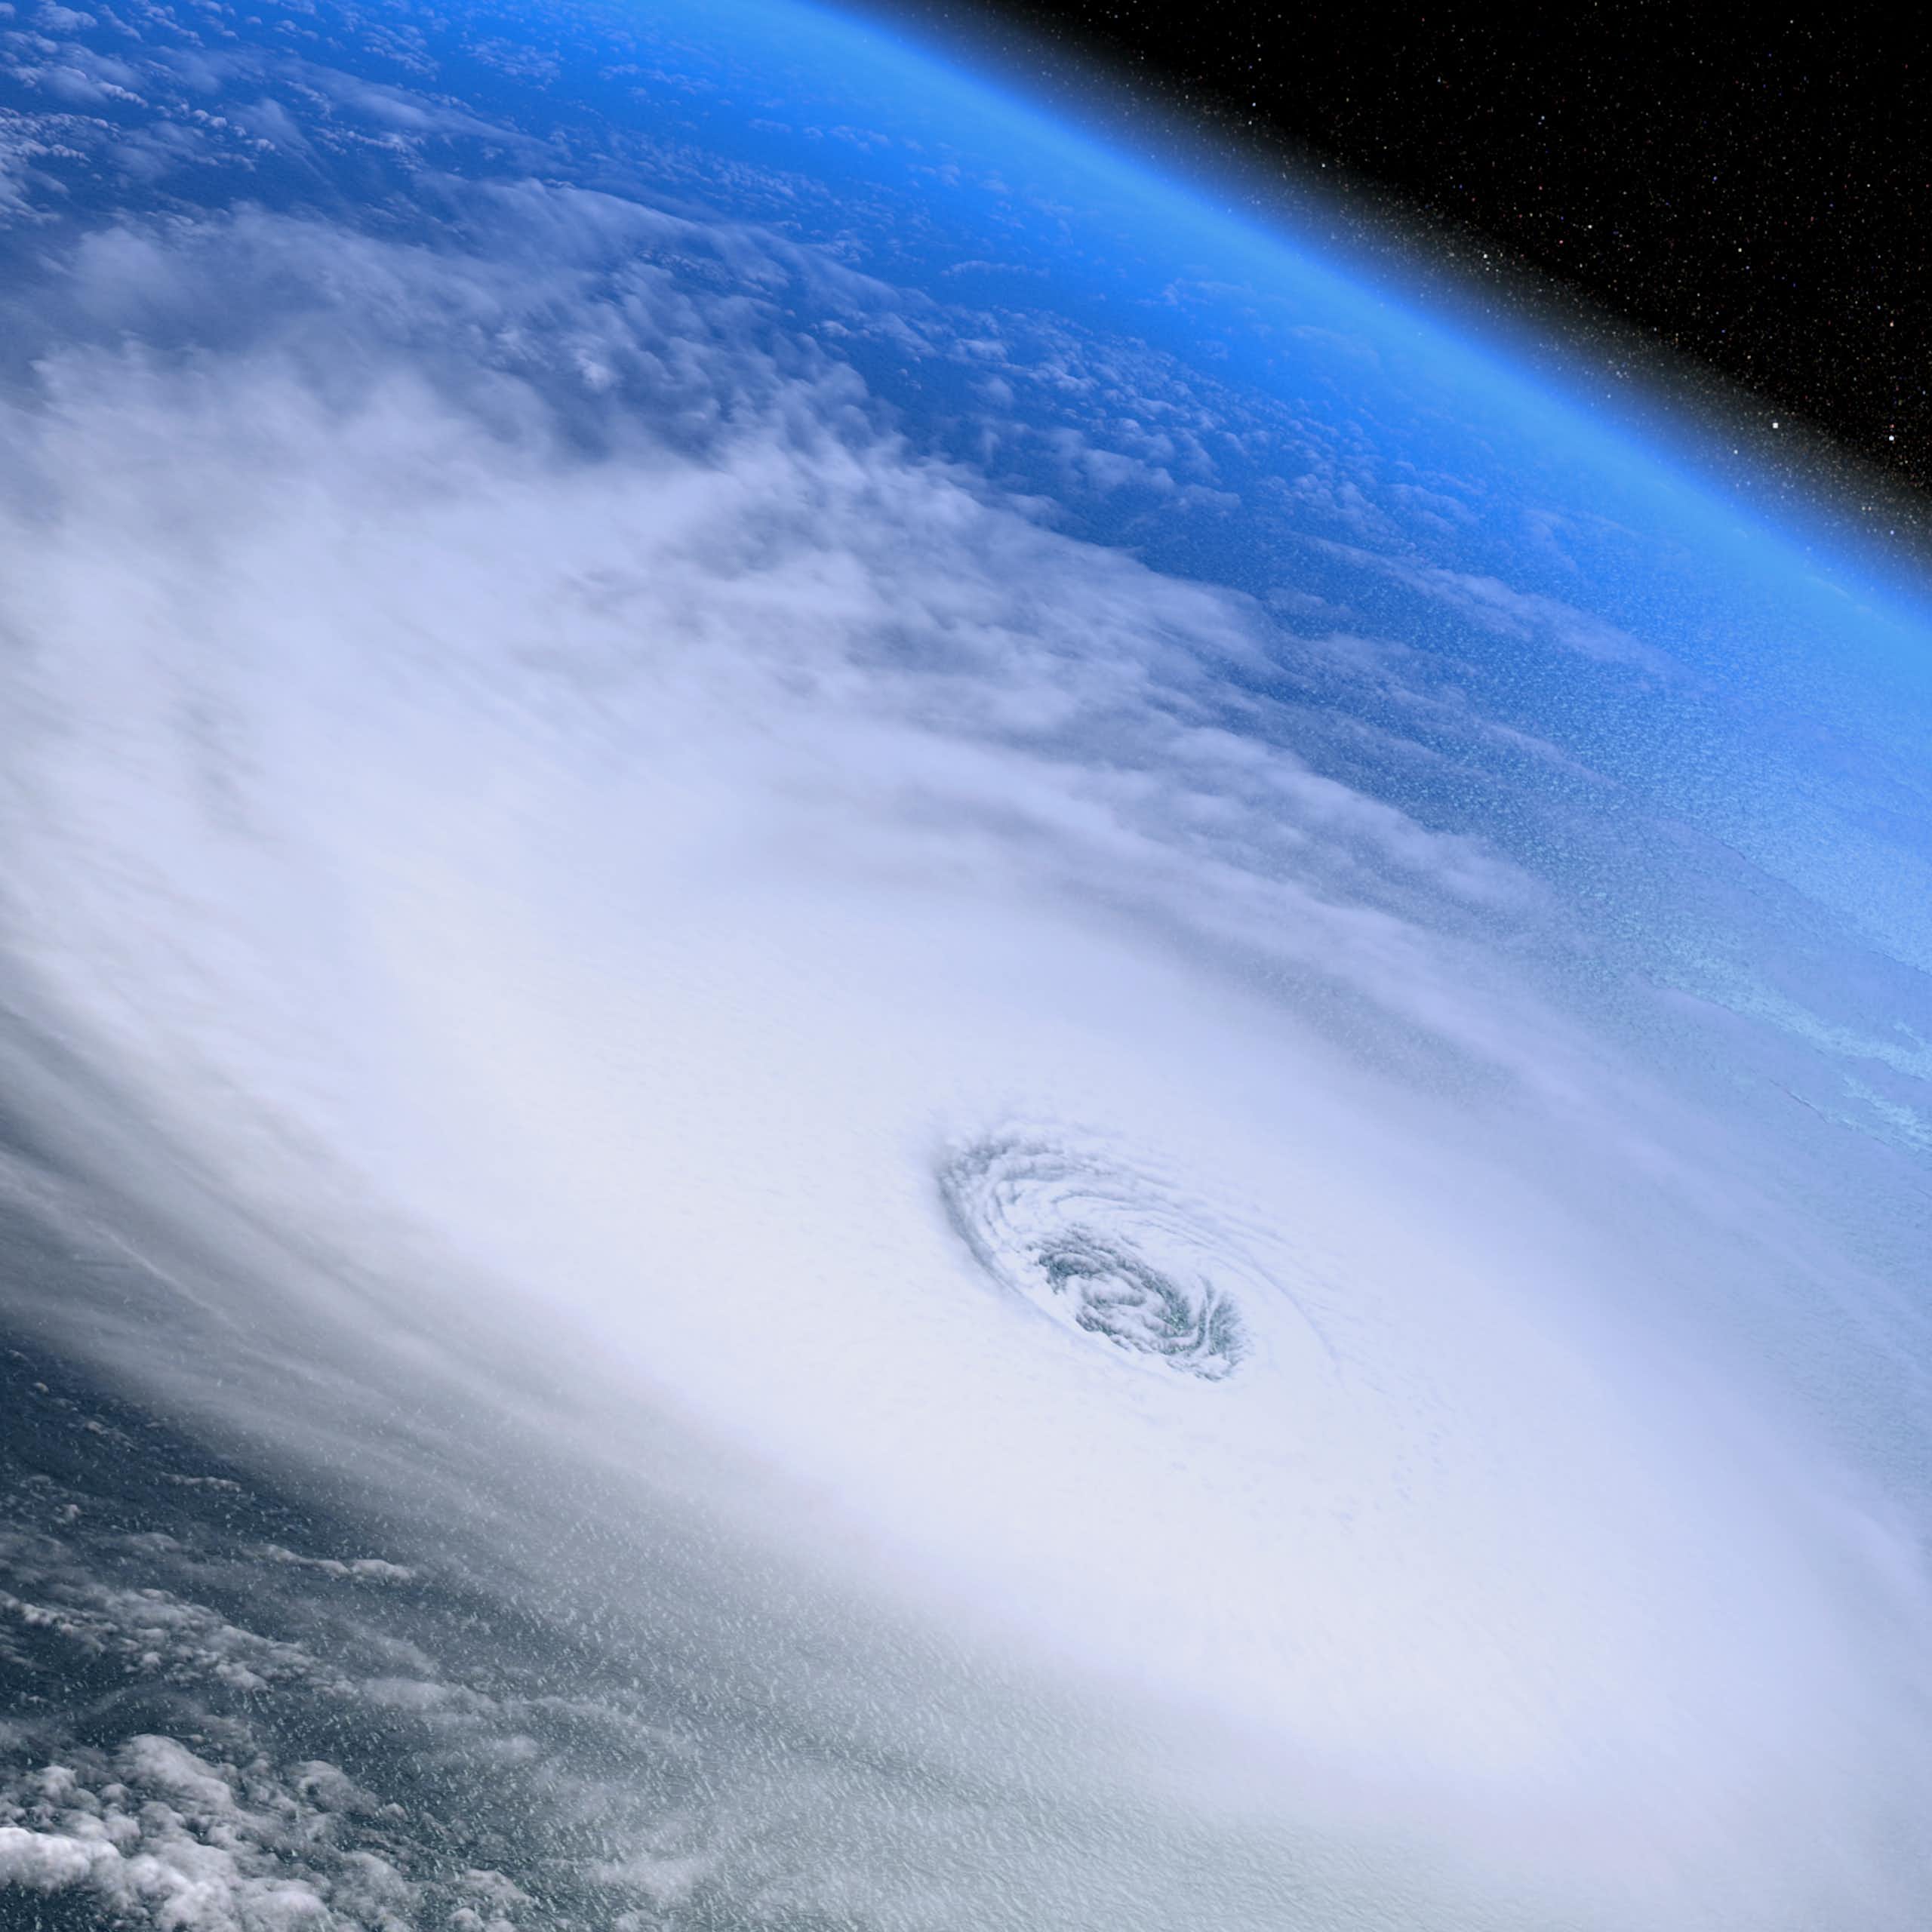 space shot looking down over white hurricane swirls over Earth